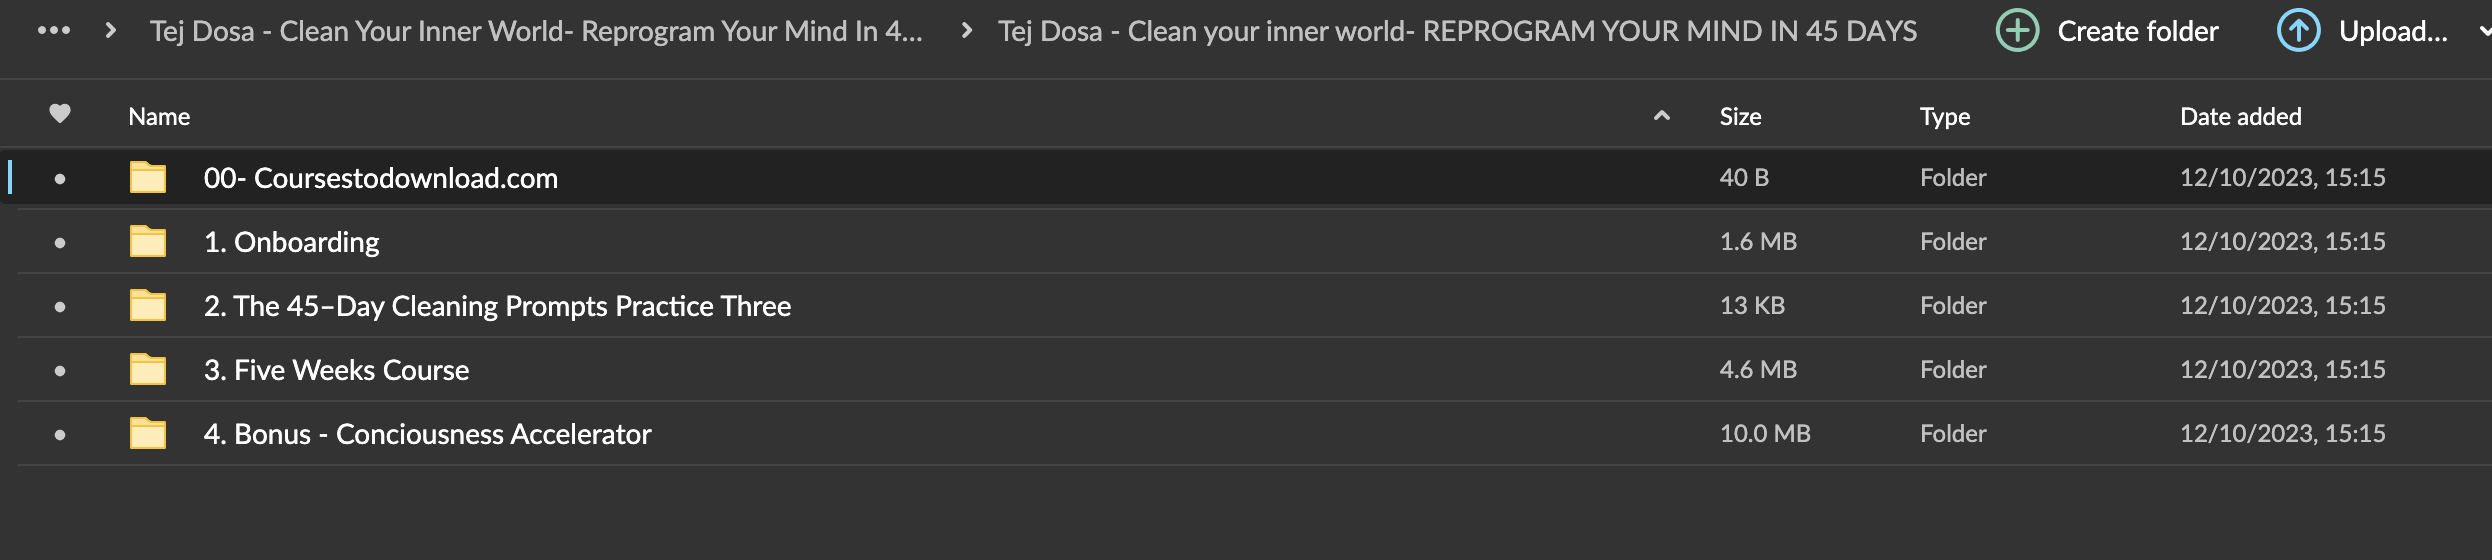 Tej Dosa - Clean Your Inner World- Reprogram Your Mind In 45 Days Download